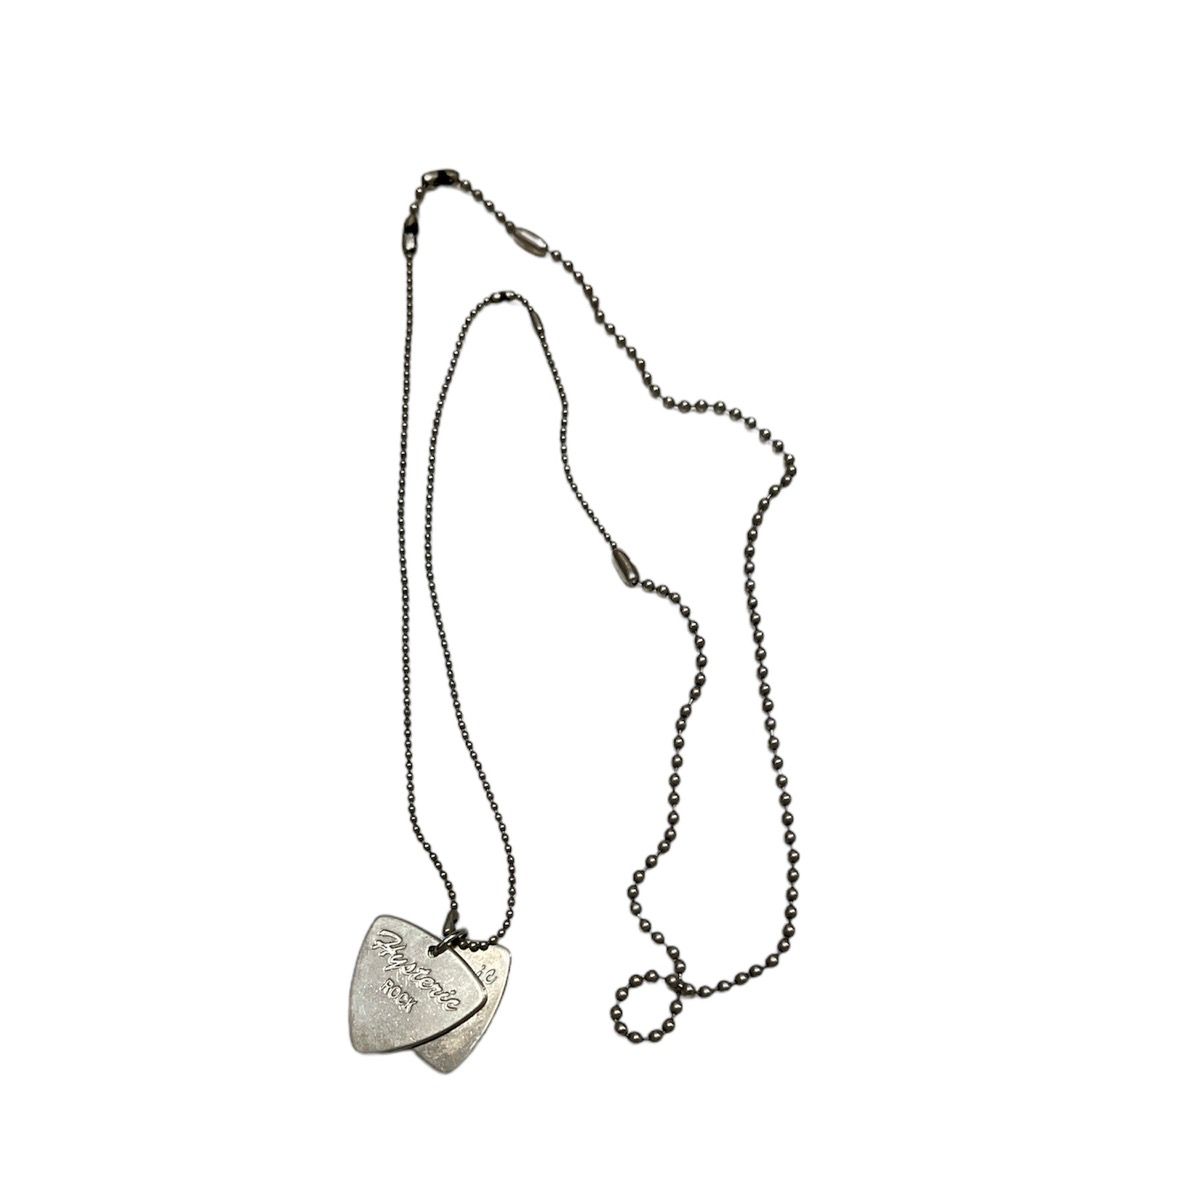 Hysteric Glamour silver guitar pick necklace - 1